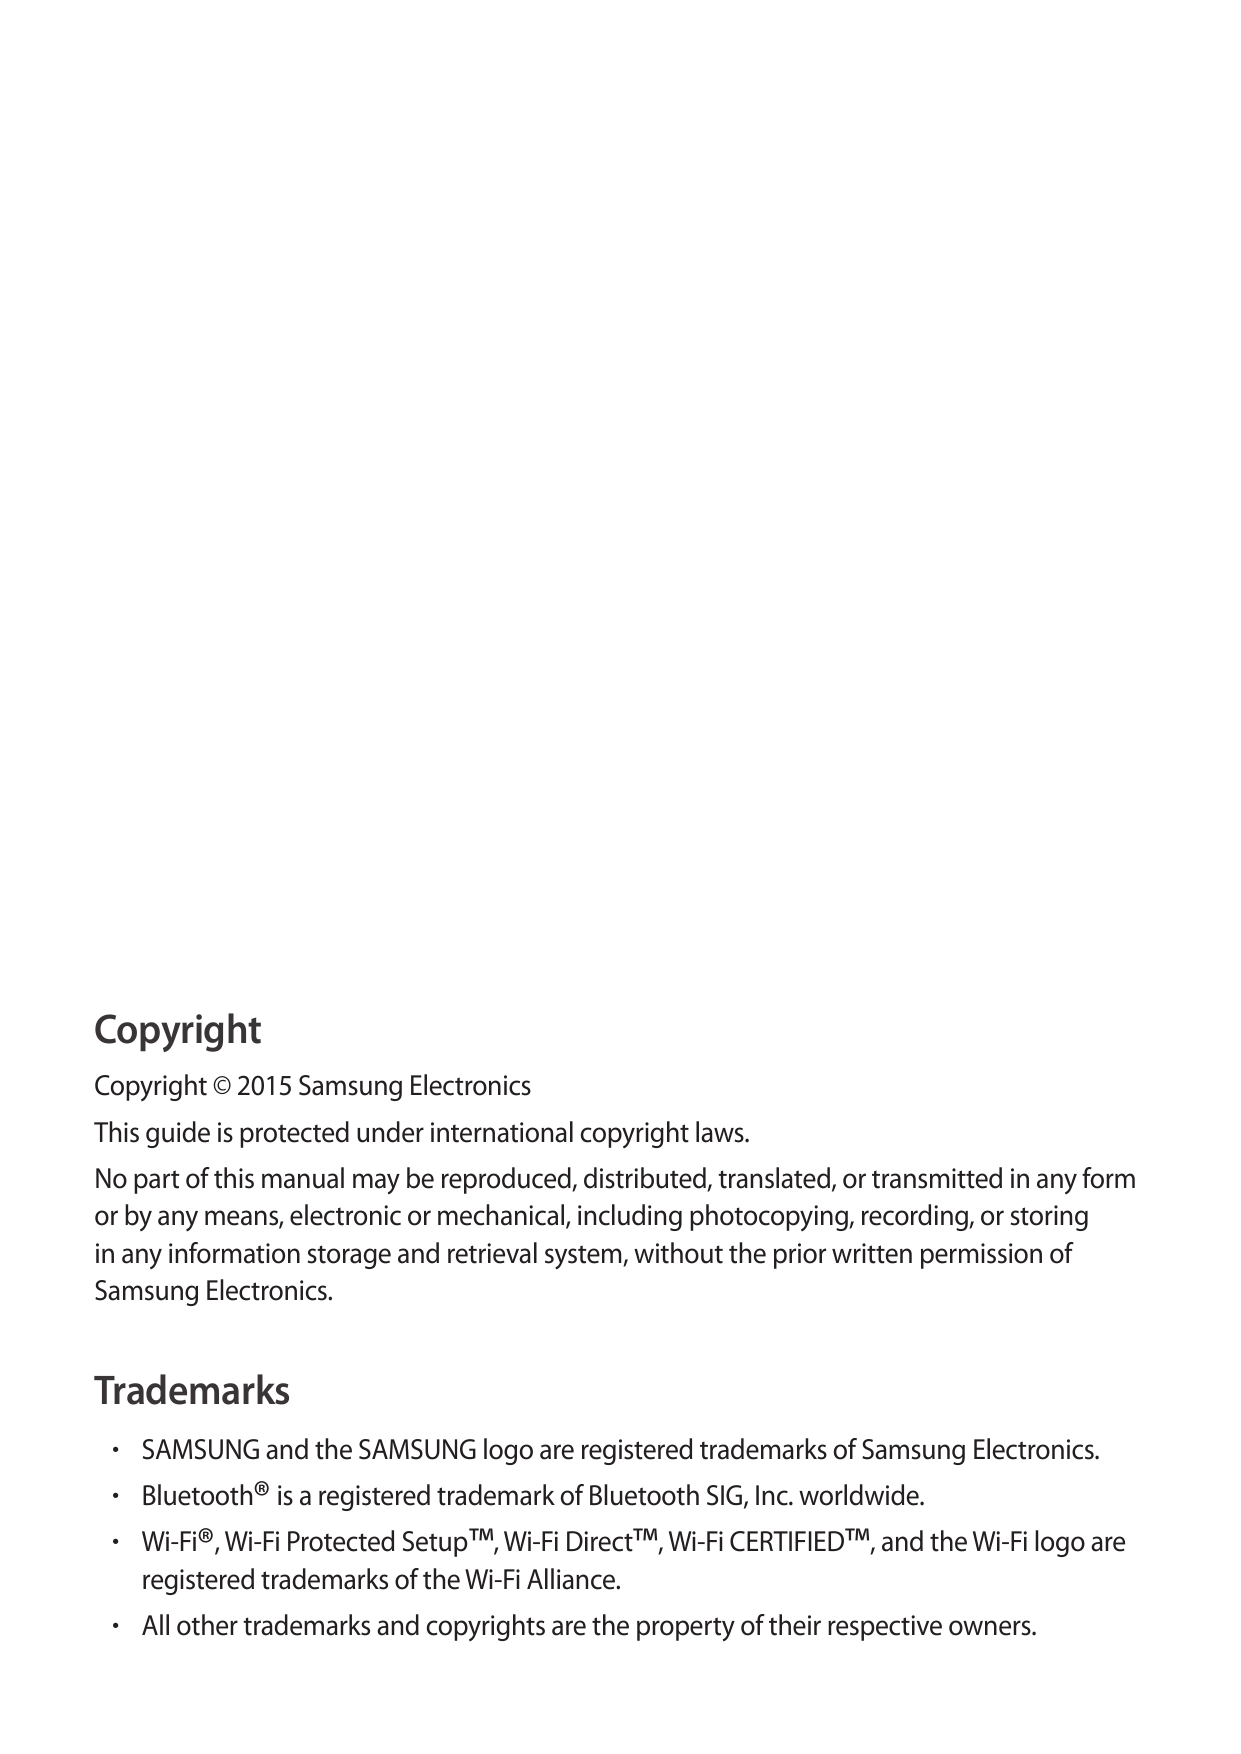 CopyrightCopyright © 2015 Samsung ElectronicsThis guide is protected under international copyright laws.No part of this manual m